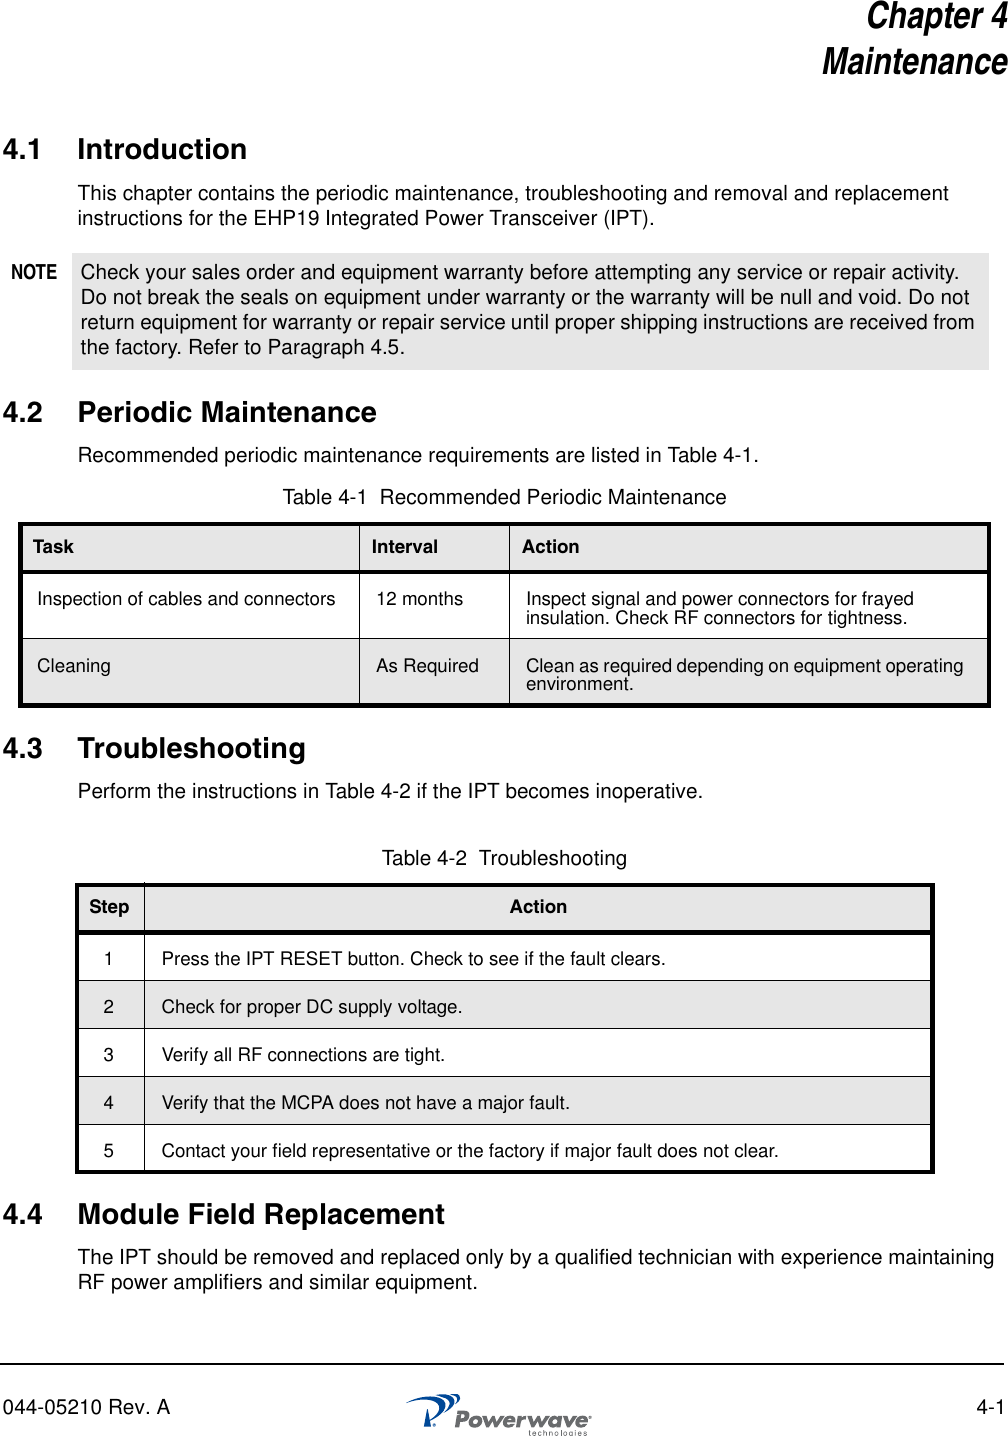 044-05210 Rev. A 4-1Chapter 4Maintenance4.1 IntroductionThis chapter contains the periodic maintenance, troubleshooting and removal and replacement instructions for the EHP19 Integrated Power Transceiver (IPT).4.2 Periodic MaintenanceRecommended periodic maintenance requirements are listed in Table 4-1.4.3 TroubleshootingPerform the instructions in Table 4-2 if the IPT becomes inoperative.4.4 Module Field ReplacementThe IPT should be removed and replaced only by a qualified technician with experience maintaining RF power amplifiers and similar equipment. NOTE Check your sales order and equipment warranty before attempting any service or repair activity. Do not break the seals on equipment under warranty or the warranty will be null and void. Do not return equipment for warranty or repair service until proper shipping instructions are received from the factory. Refer to Paragraph 4.5.Table 4-1  Recommended Periodic MaintenanceTask Interval ActionInspection of cables and connectors 12 months Inspect signal and power connectors for frayed insulation. Check RF connectors for tightness.Cleaning As Required Clean as required depending on equipment operating environment.Table 4-2  Troubleshooting Step Action1 Press the IPT RESET button. Check to see if the fault clears.2Check for proper DC supply voltage.3 Verify all RF connections are tight.4Verify that the MCPA does not have a major fault.5 Contact your field representative or the factory if major fault does not clear.